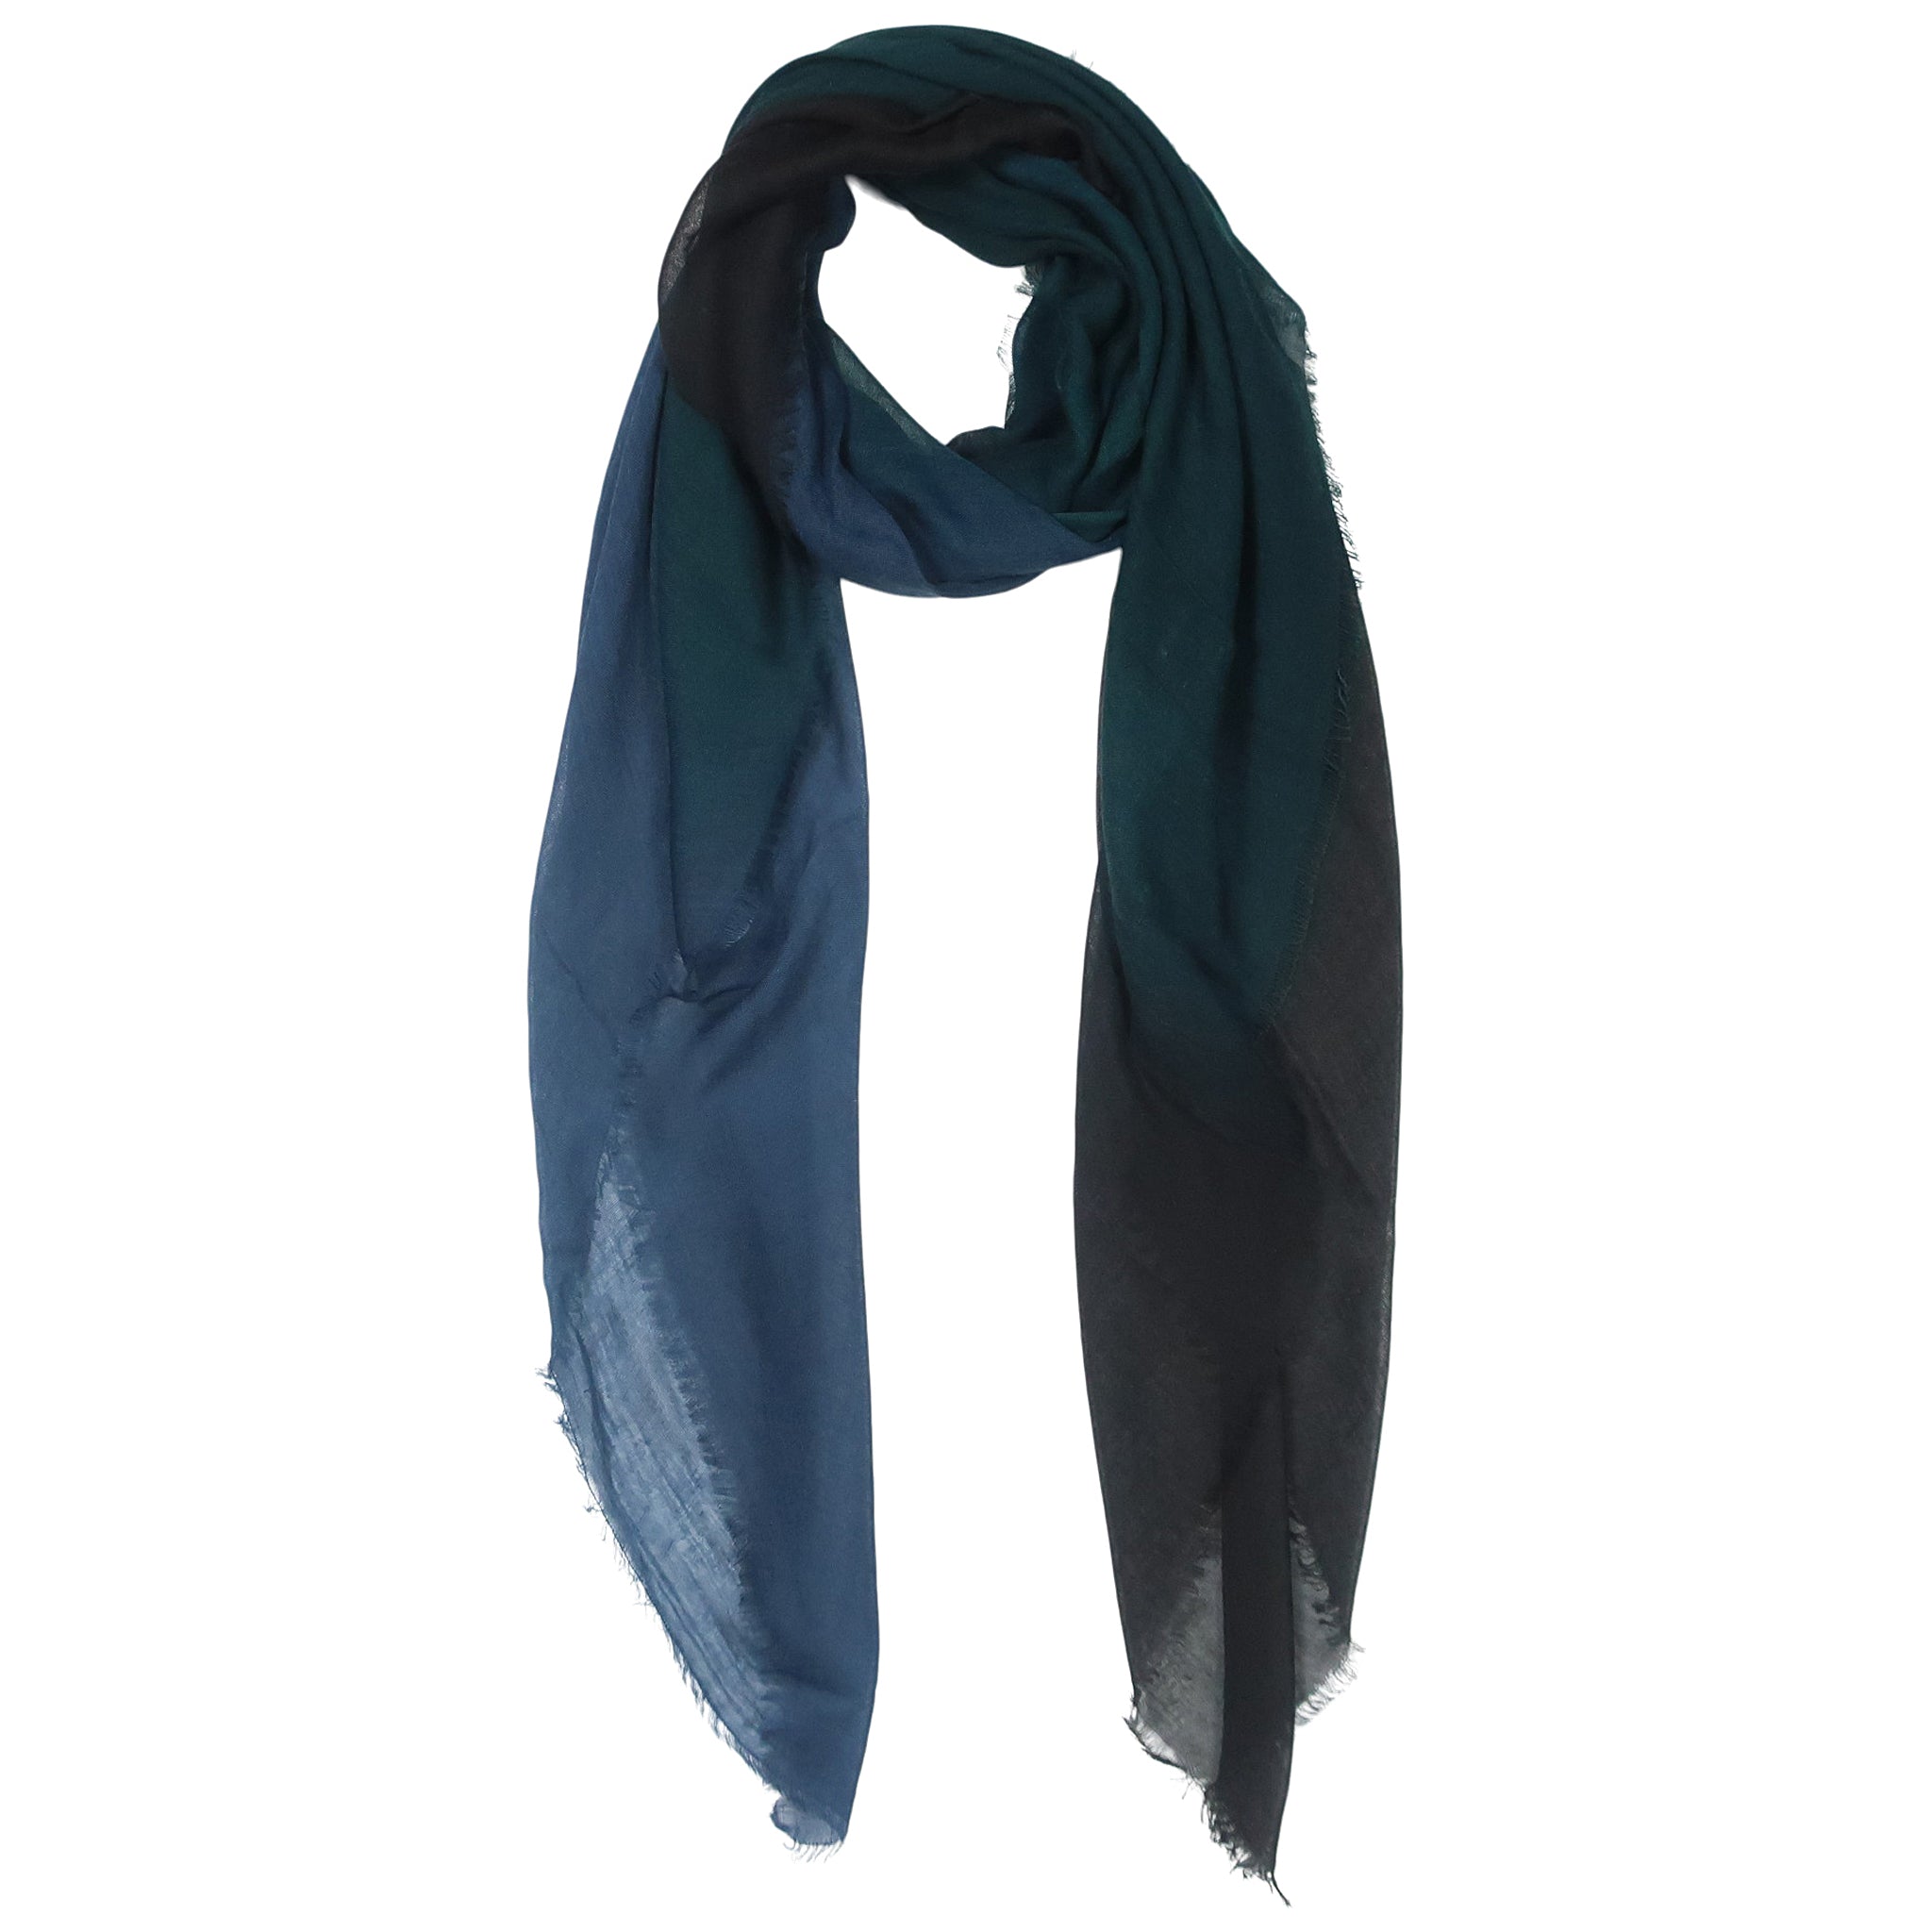 Blue Pacific Dream Cashmere and Silk Scarf in Blue and Teal 47 x 37